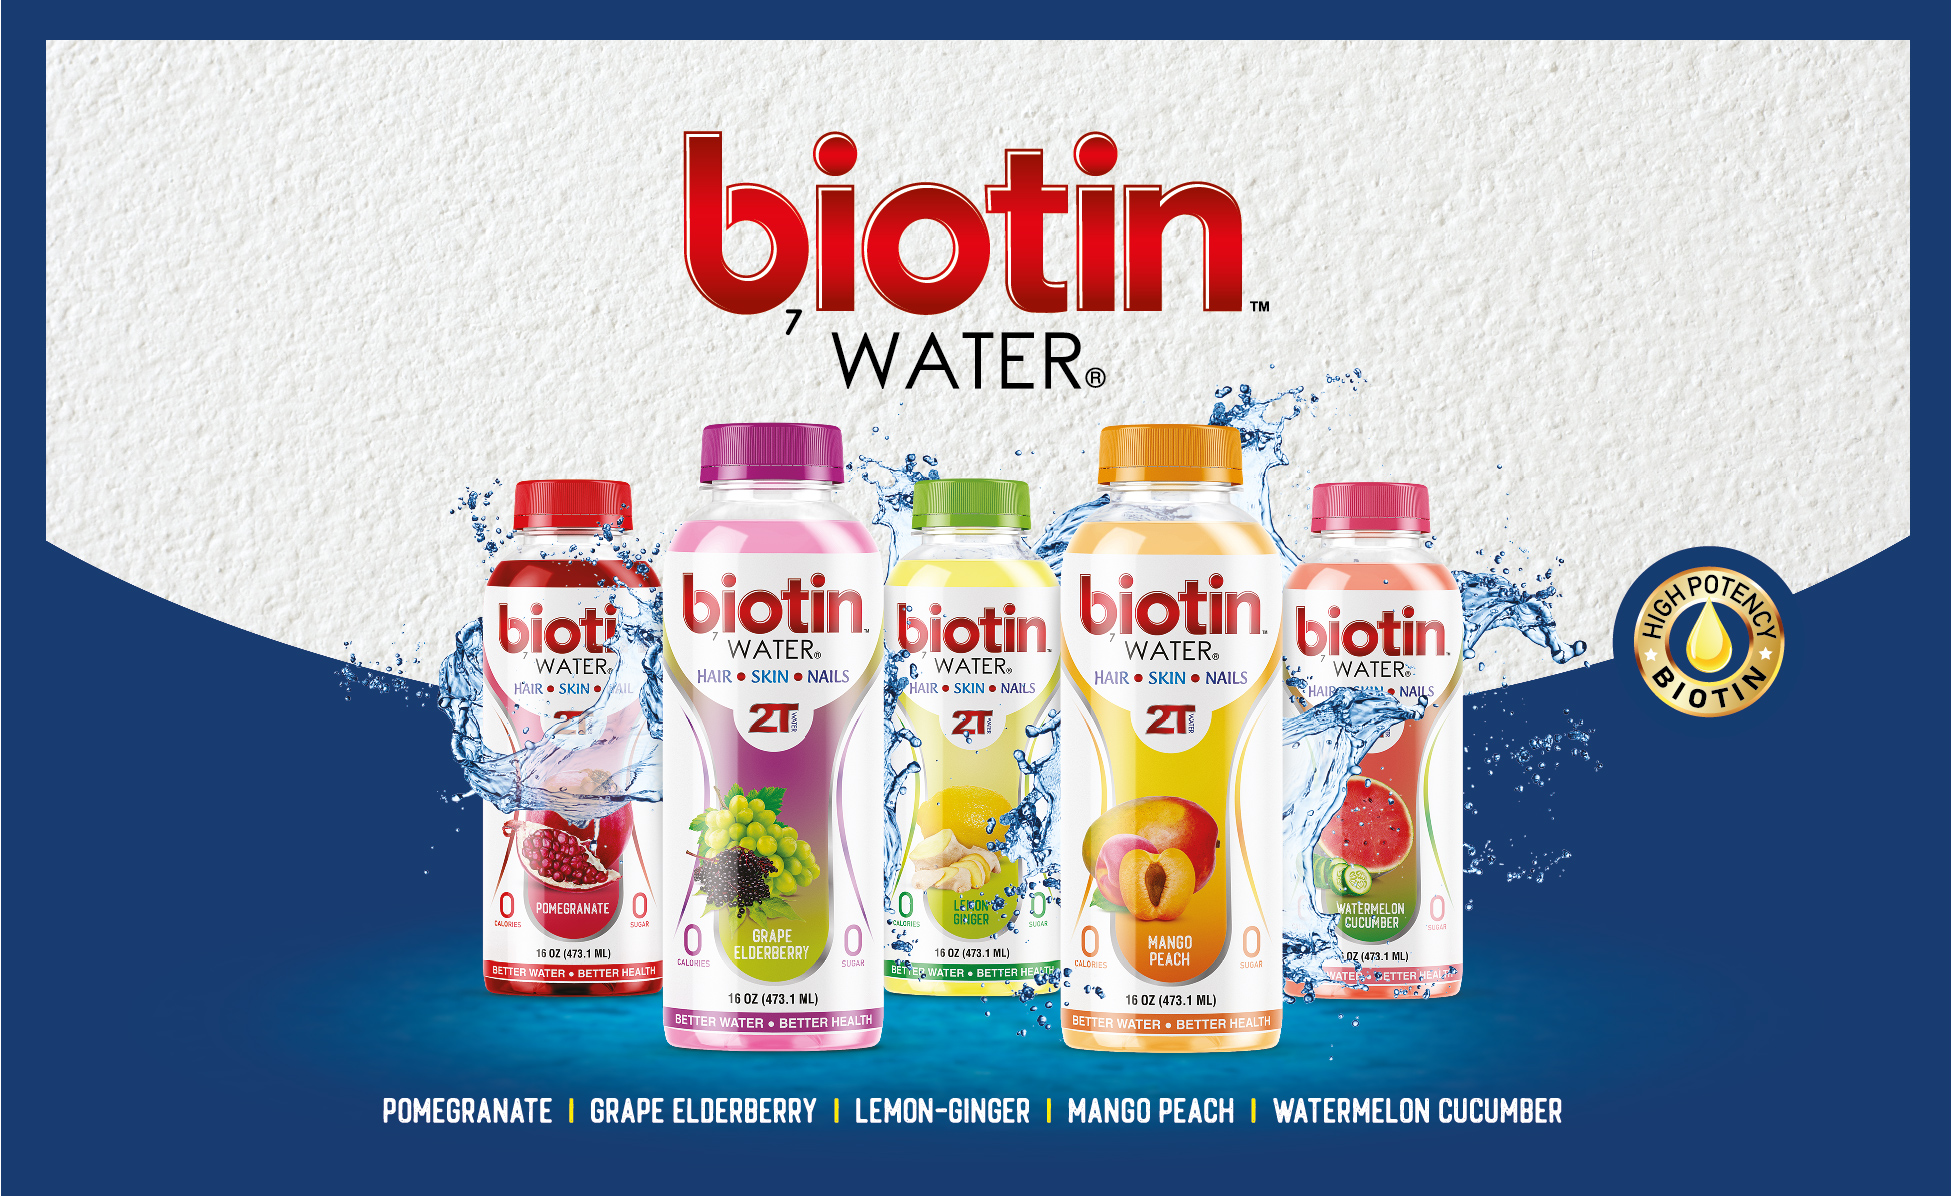 2T Water Gears Up For A Refresh Of Its Biotin Water® Hair, Skin, and Nails